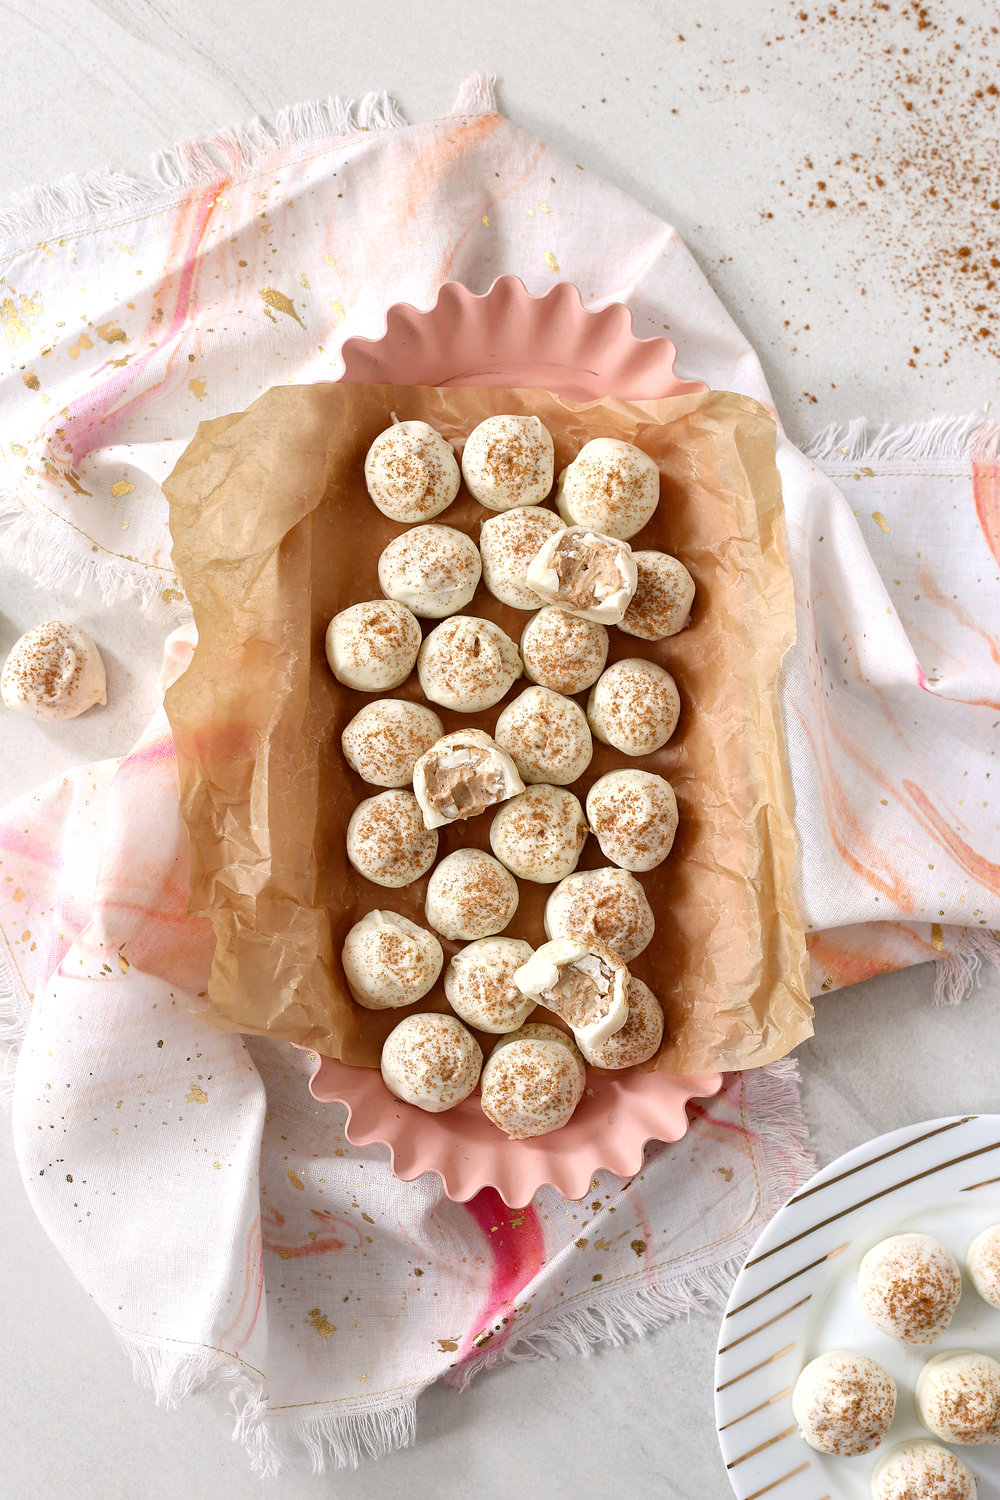 Get the recipe for these Cinnamon Bun Cheesecake Bites! Unusuallylovely.com